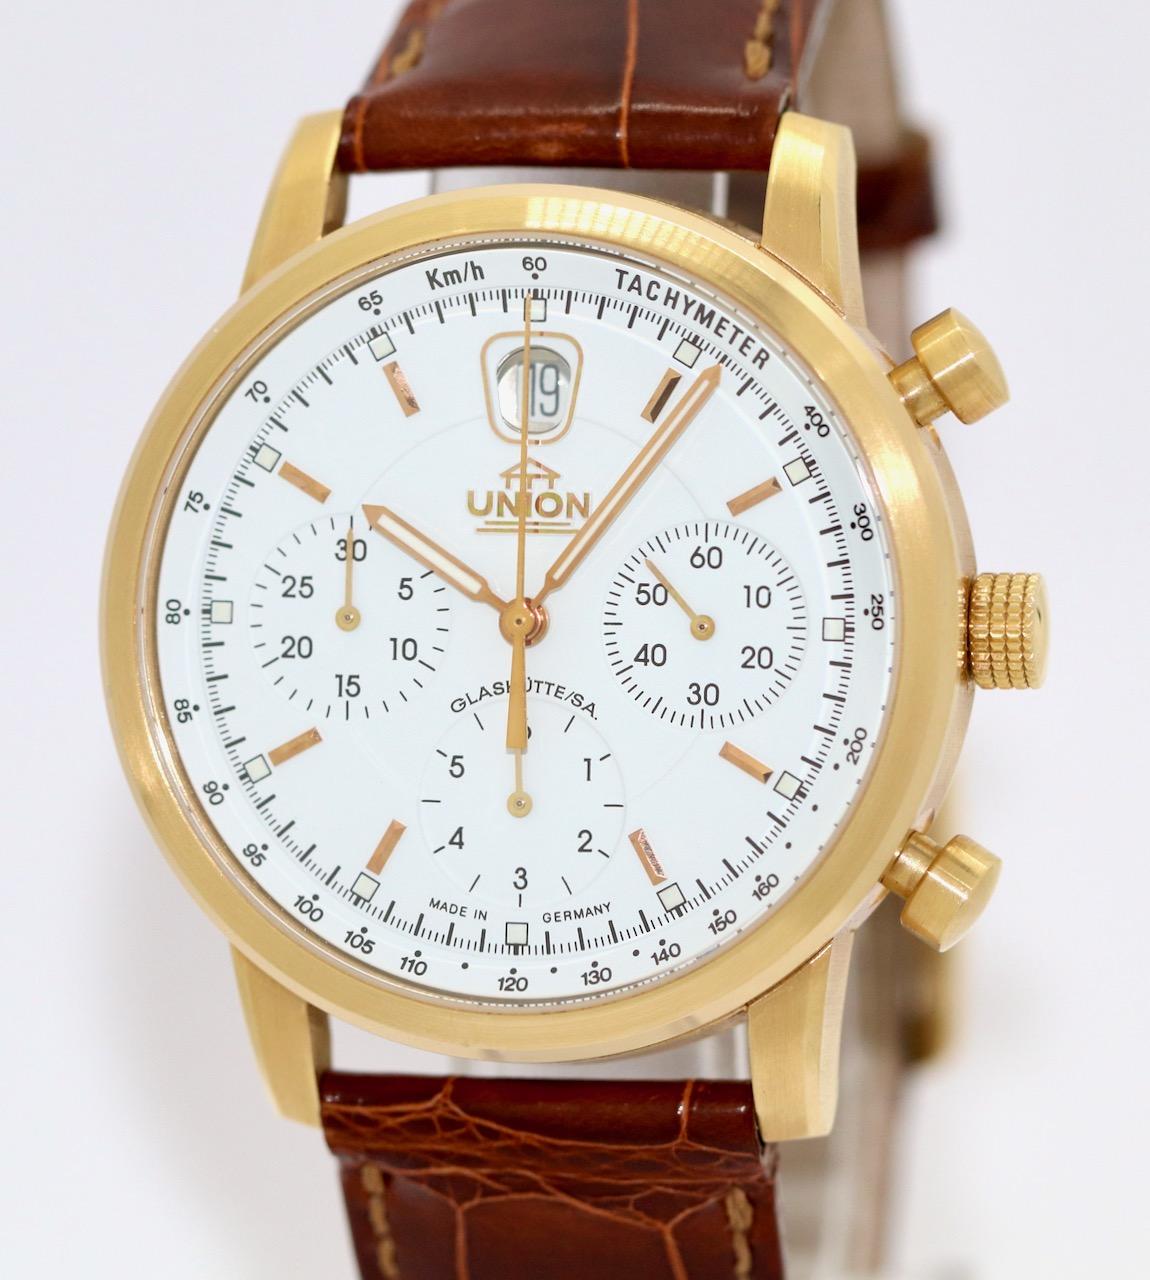 Extremely rare Union Glashutte (Saxony) Chronograph in 18 carat solid gold, limited to 50 pieces!

Including original Box and Papers!

From private collection.